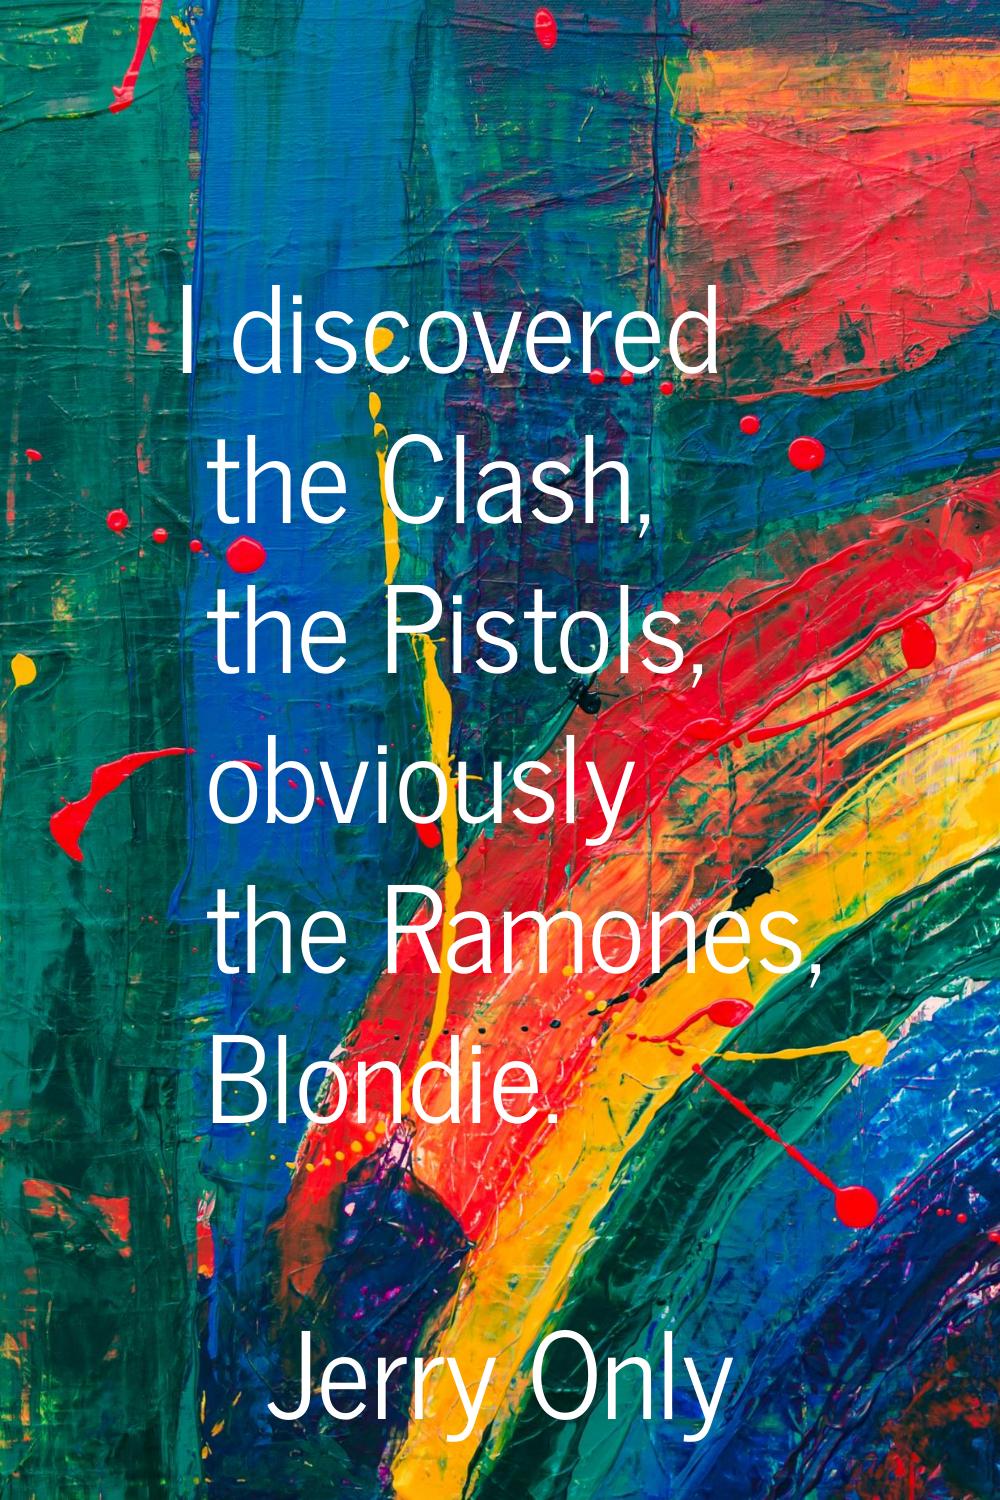 I discovered the Clash, the Pistols, obviously the Ramones, Blondie.